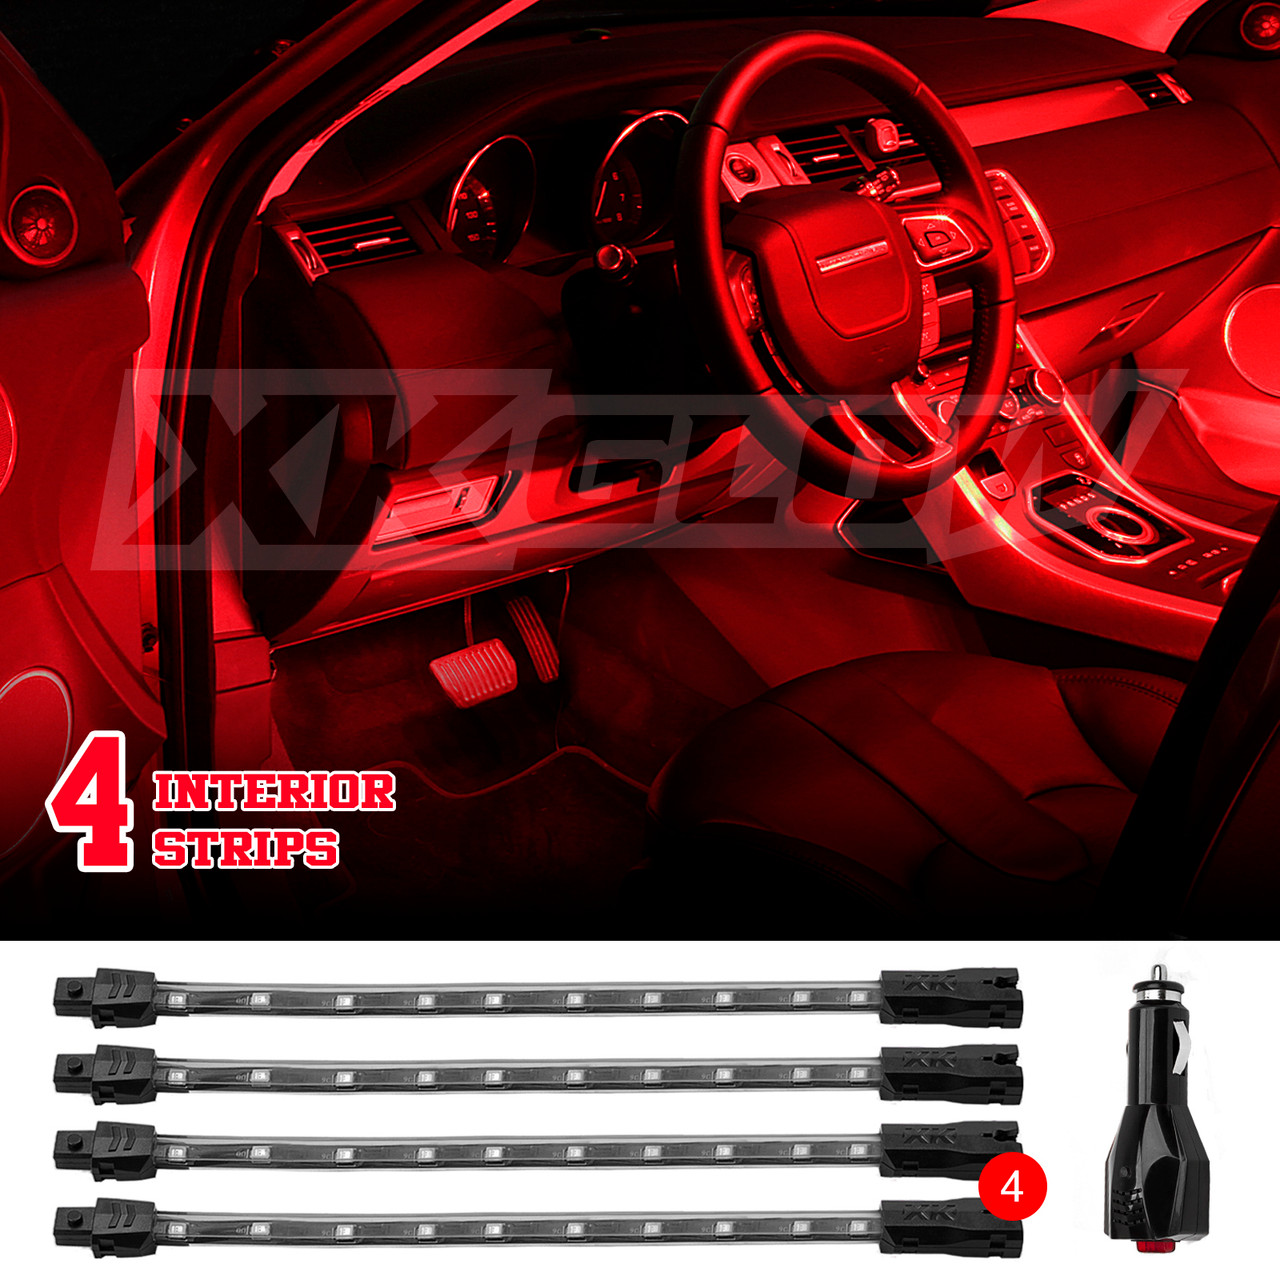 LEDGlow  4PC Red LED Interior Lights for Cars and Trucks